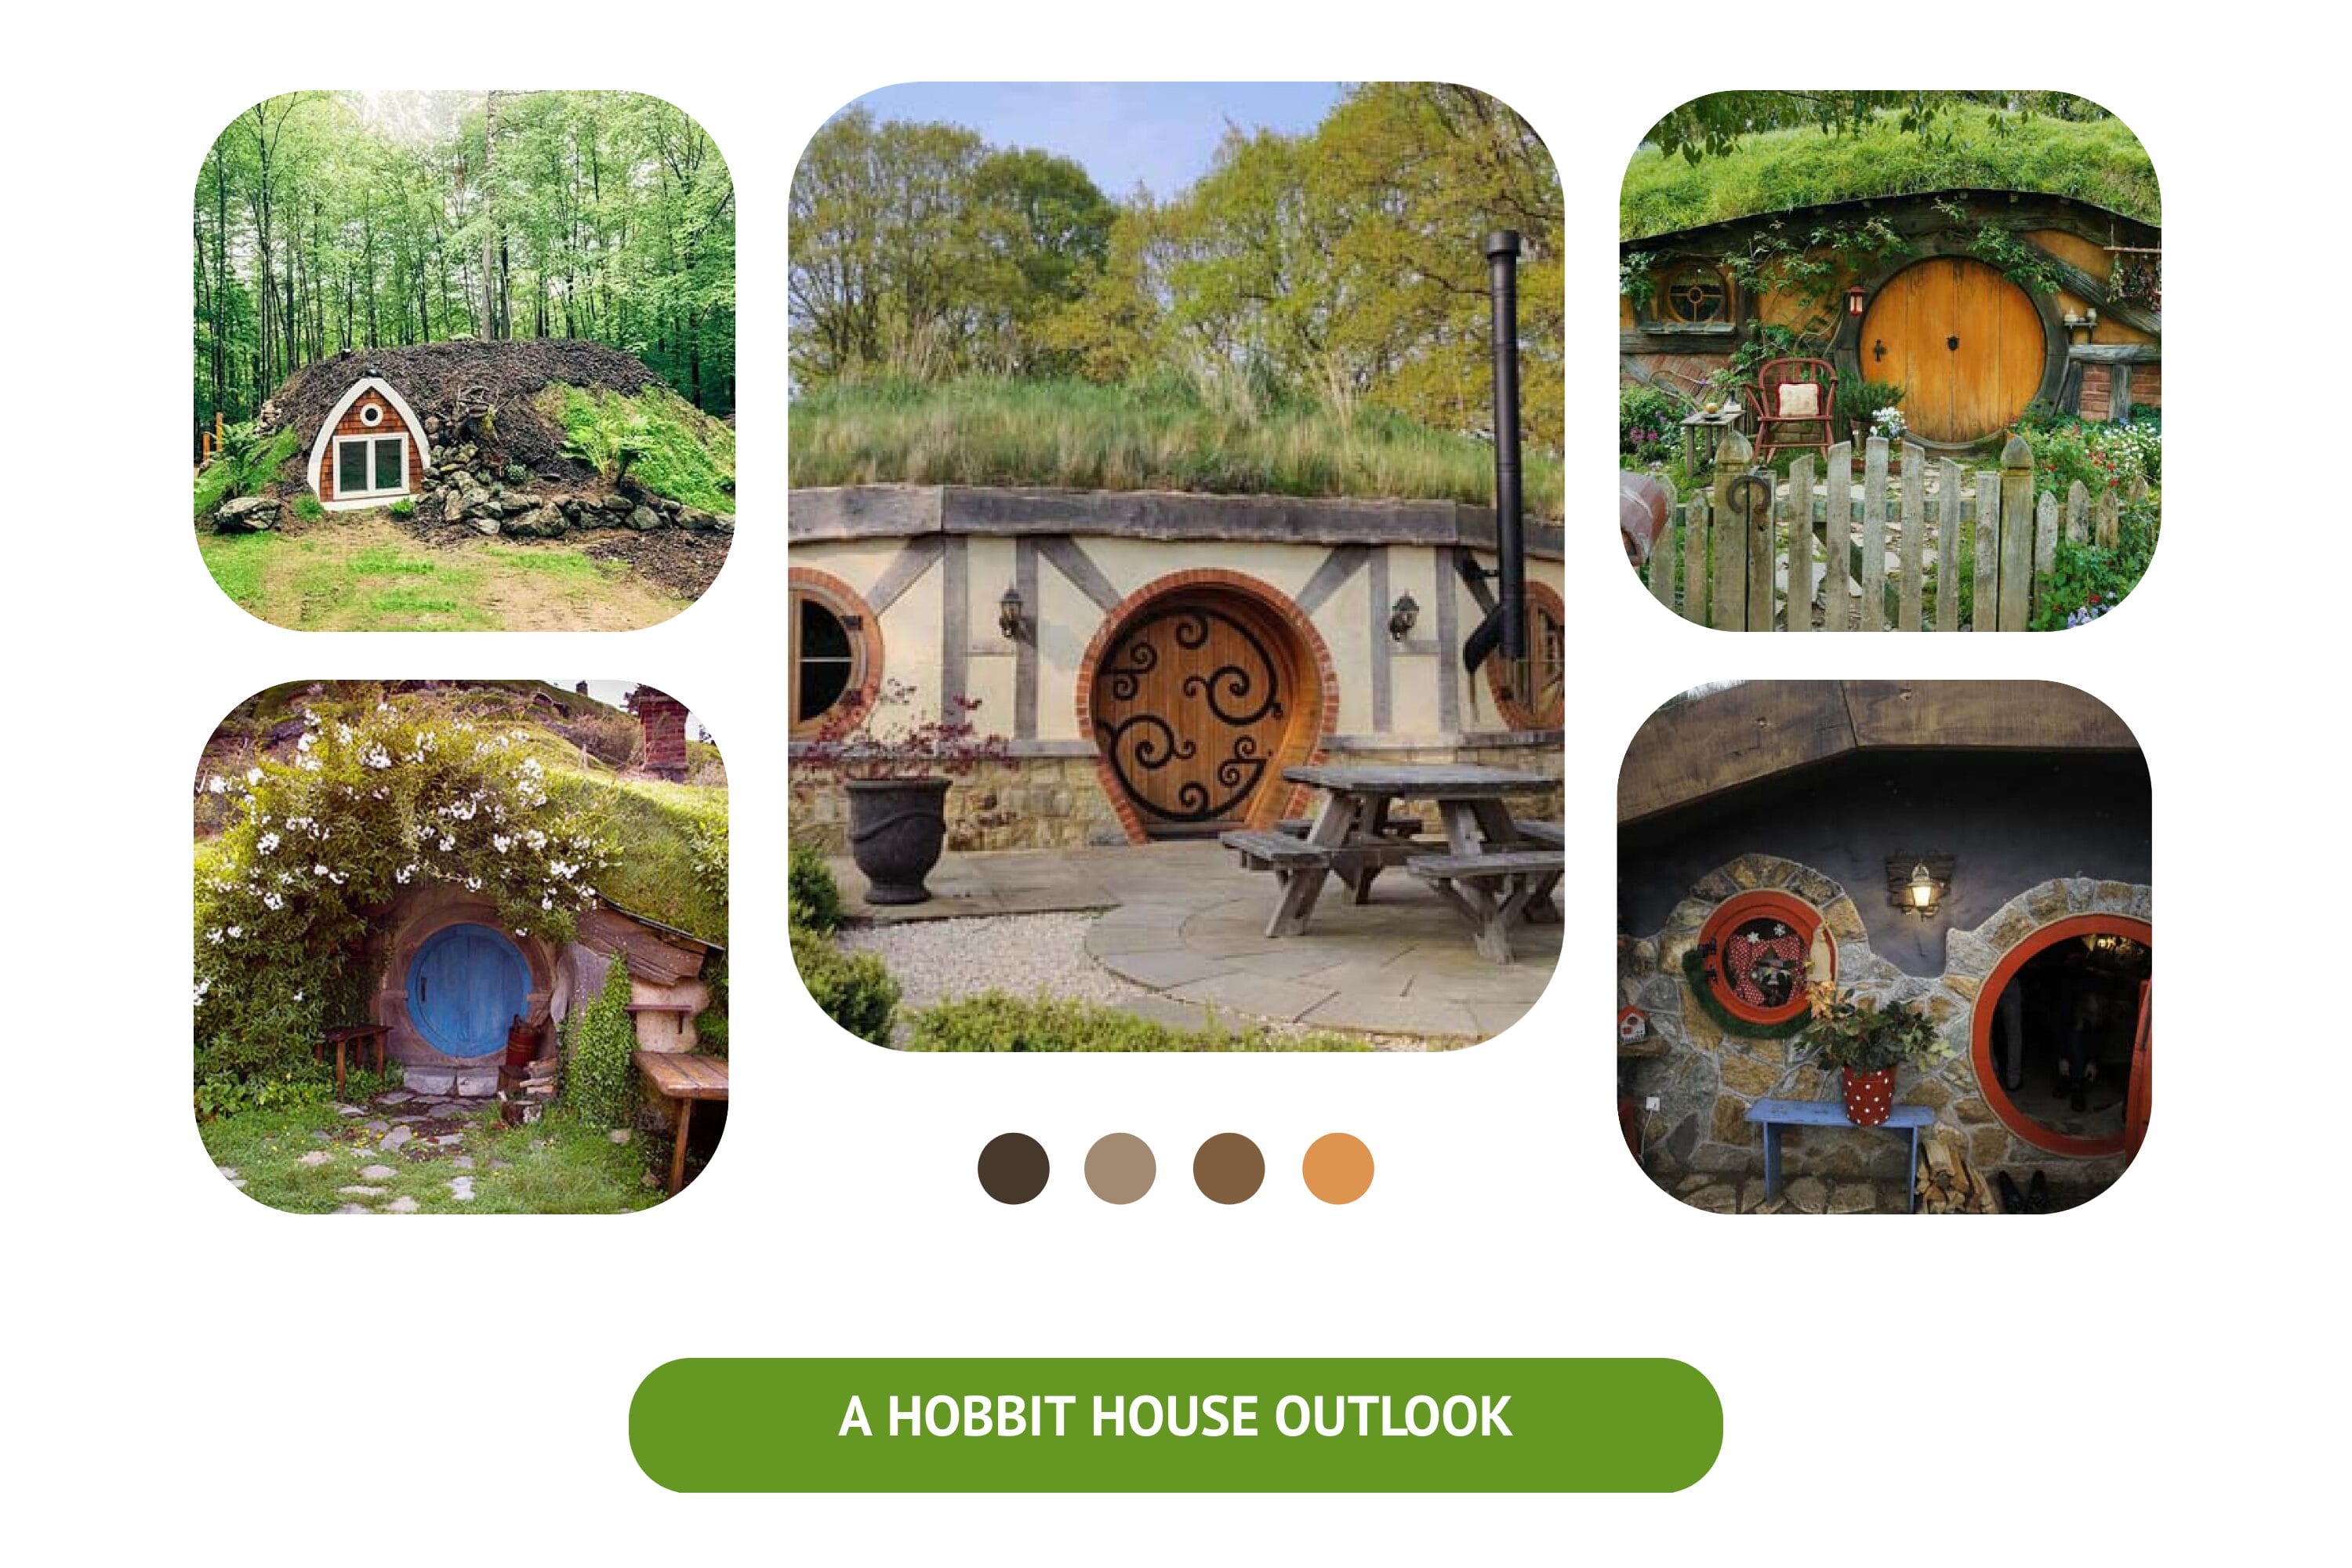 Construct a hobbit-style dwelling.